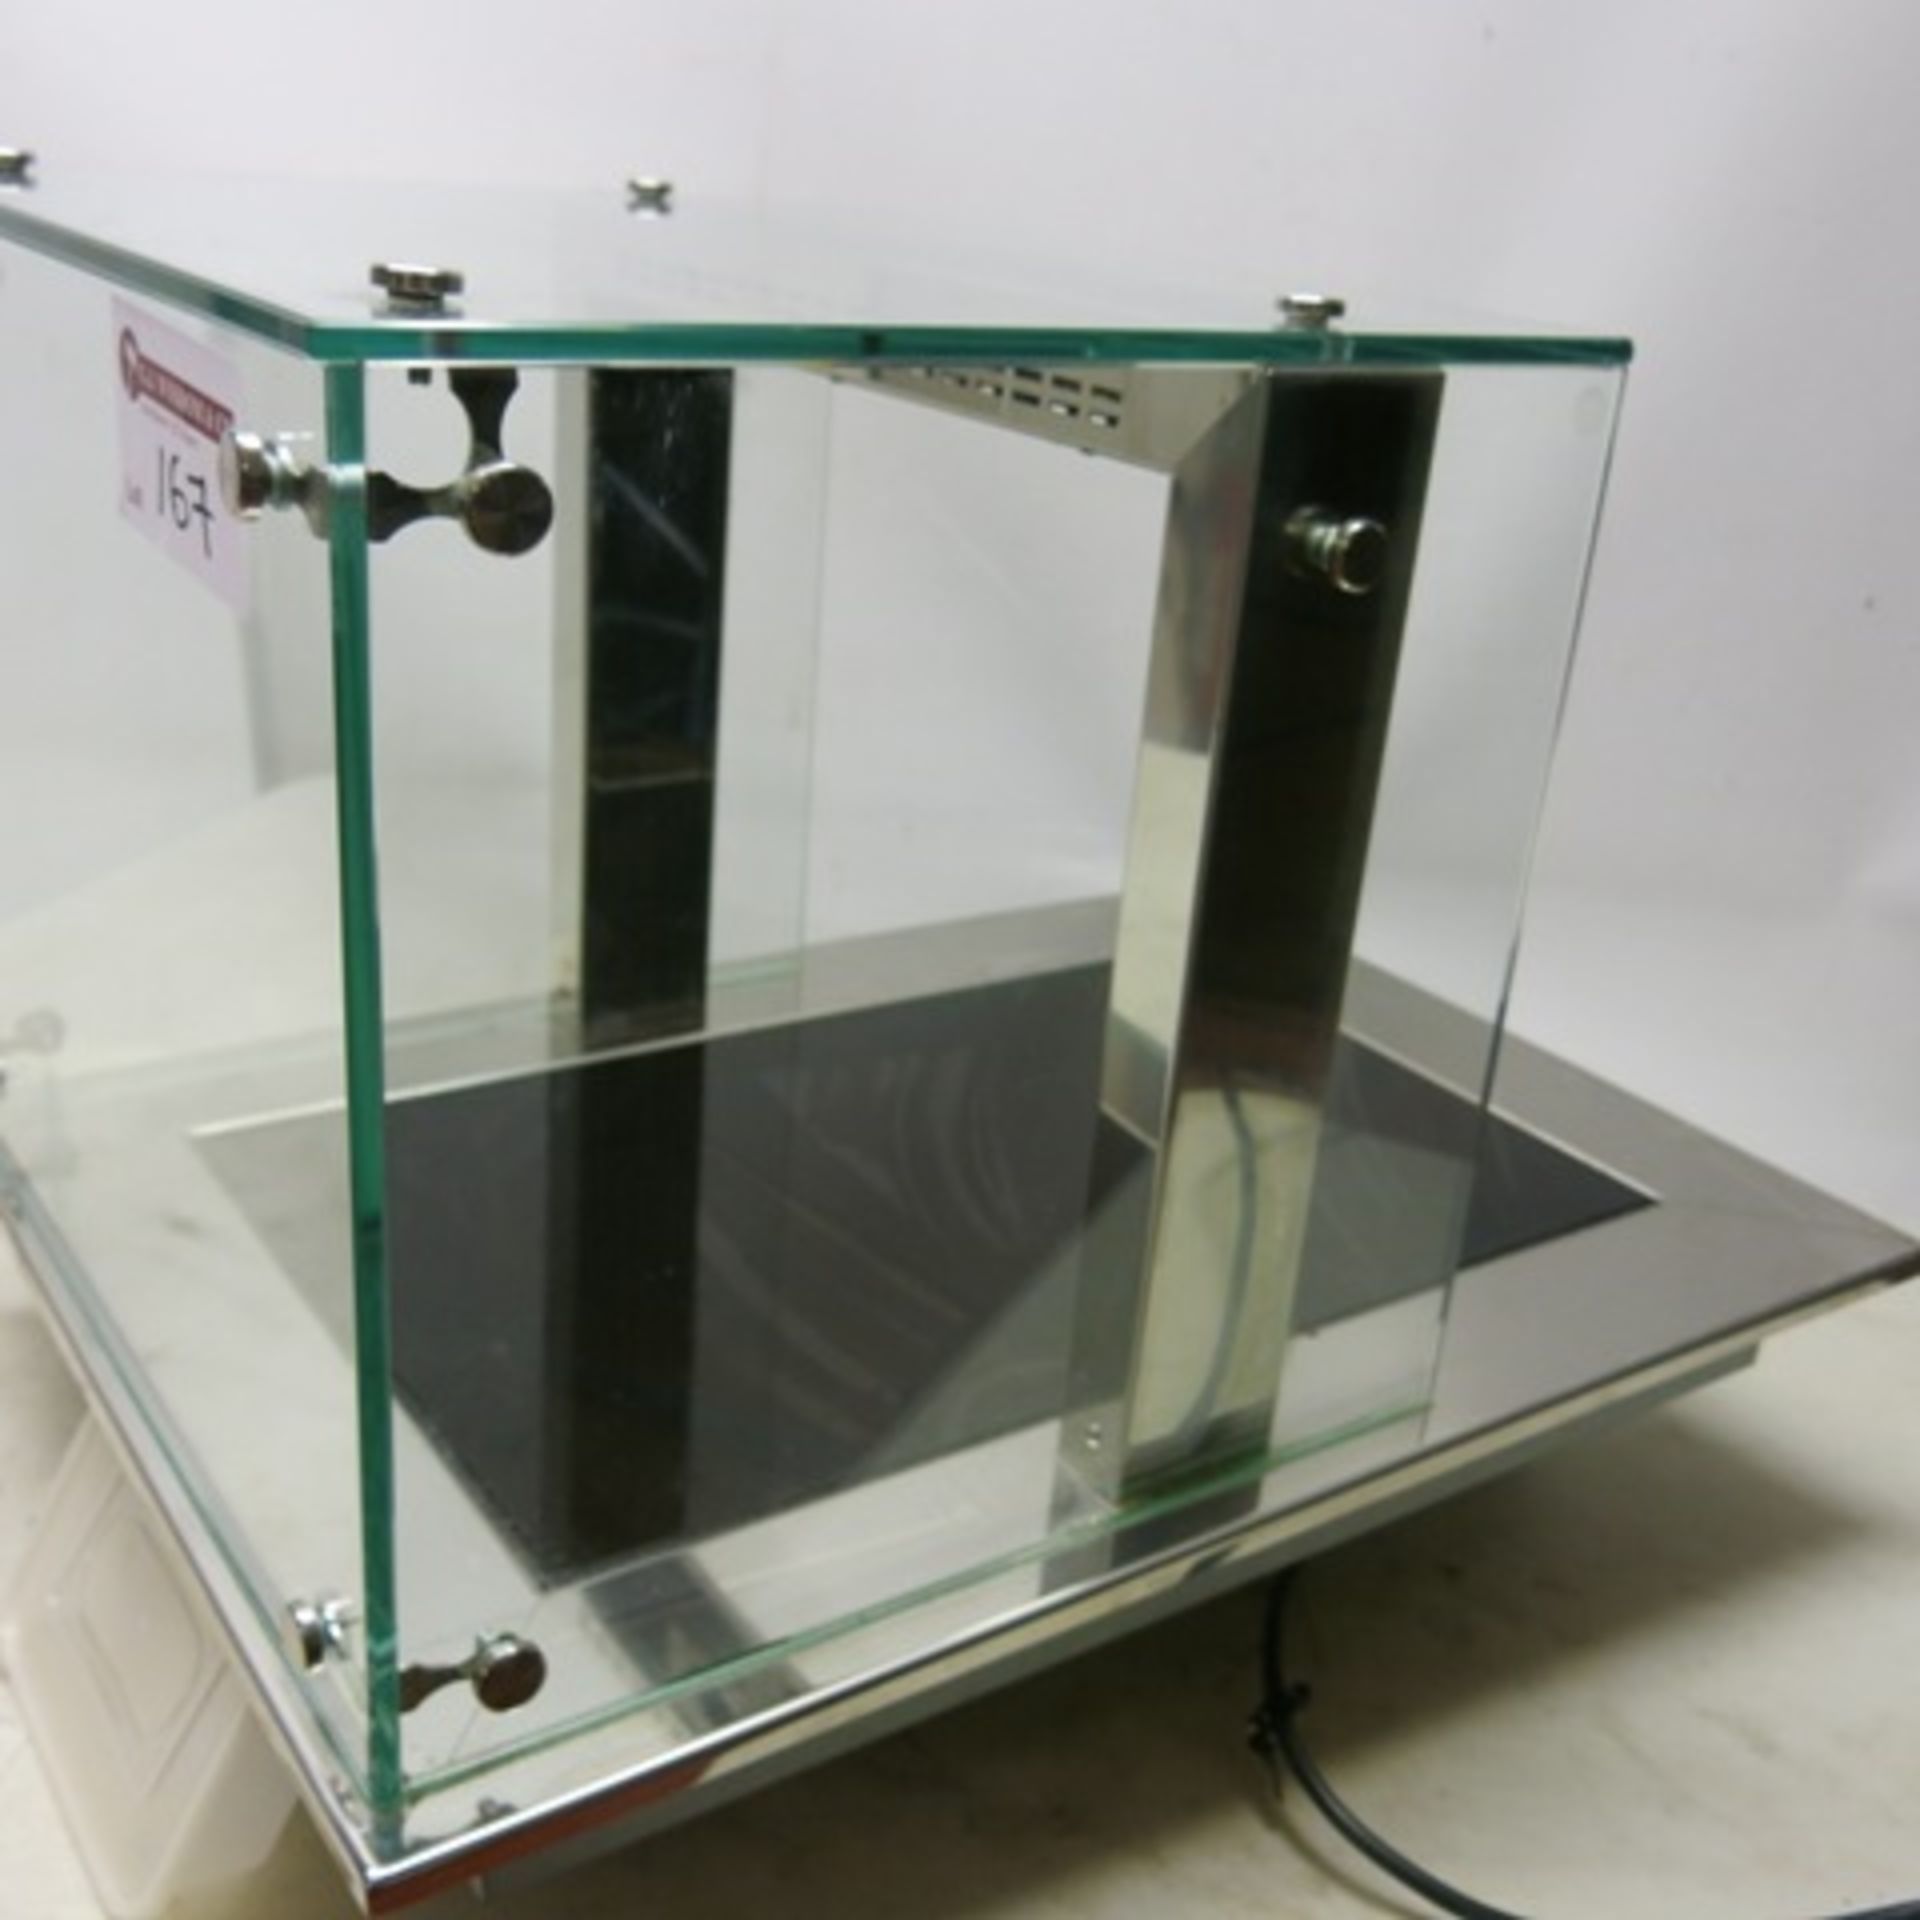 Cafecounters Heated Cerran Drop-In Hotplate in Glass Display Surround with Digital Display, Model - Image 2 of 7